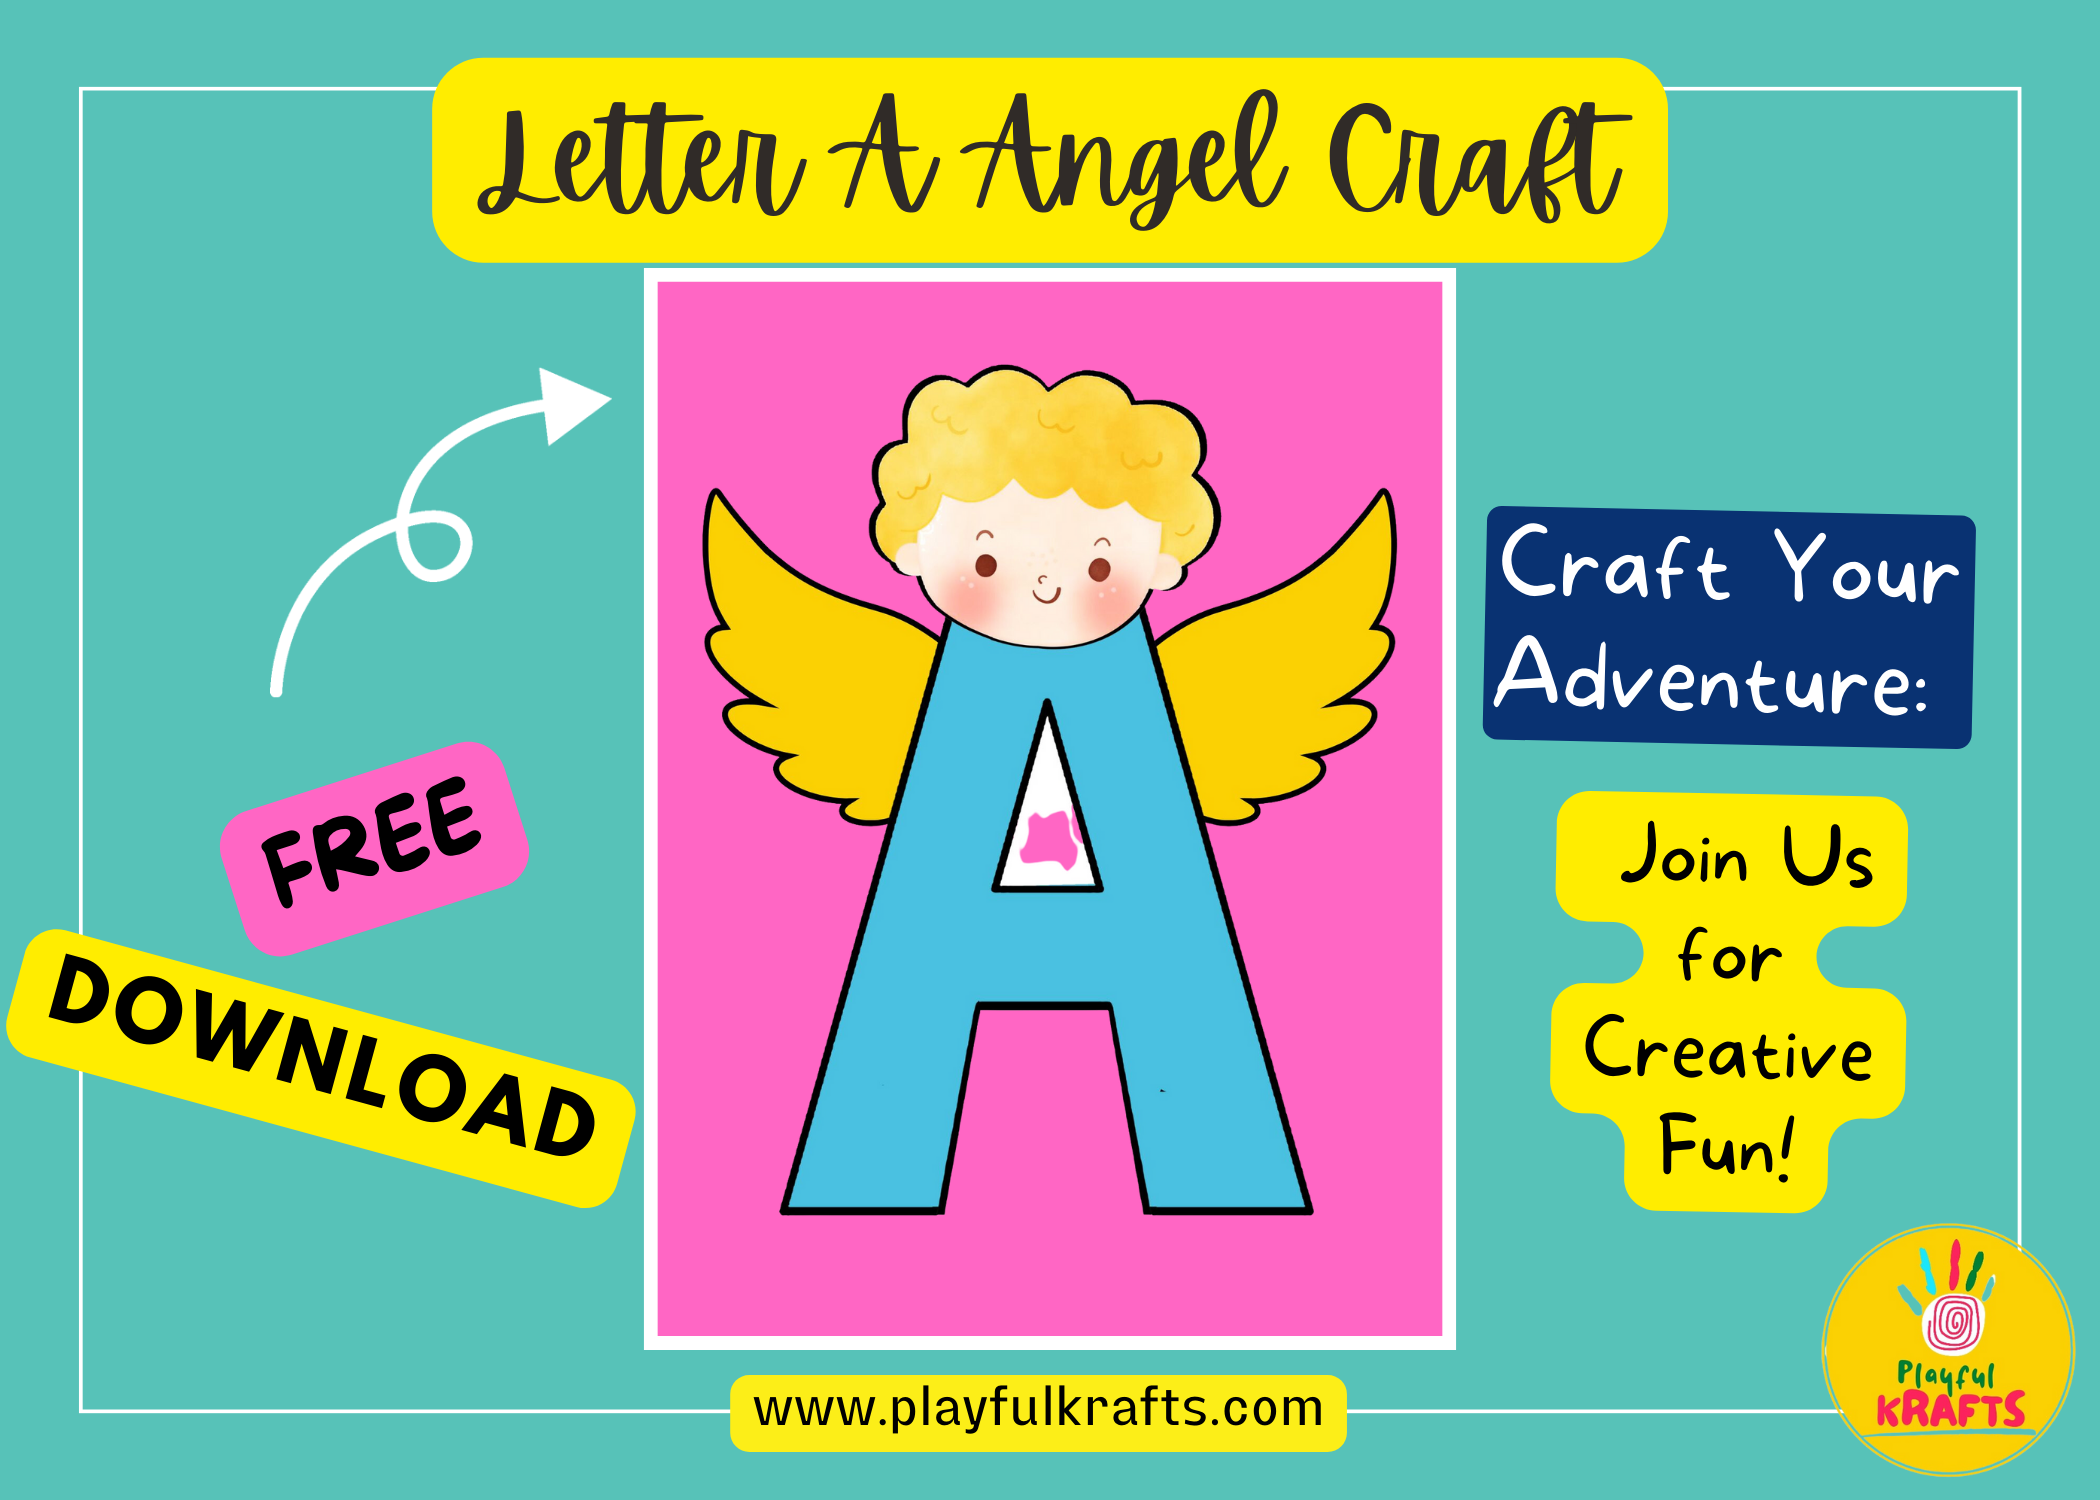 Letter-A-Angel-Craft-tutorial